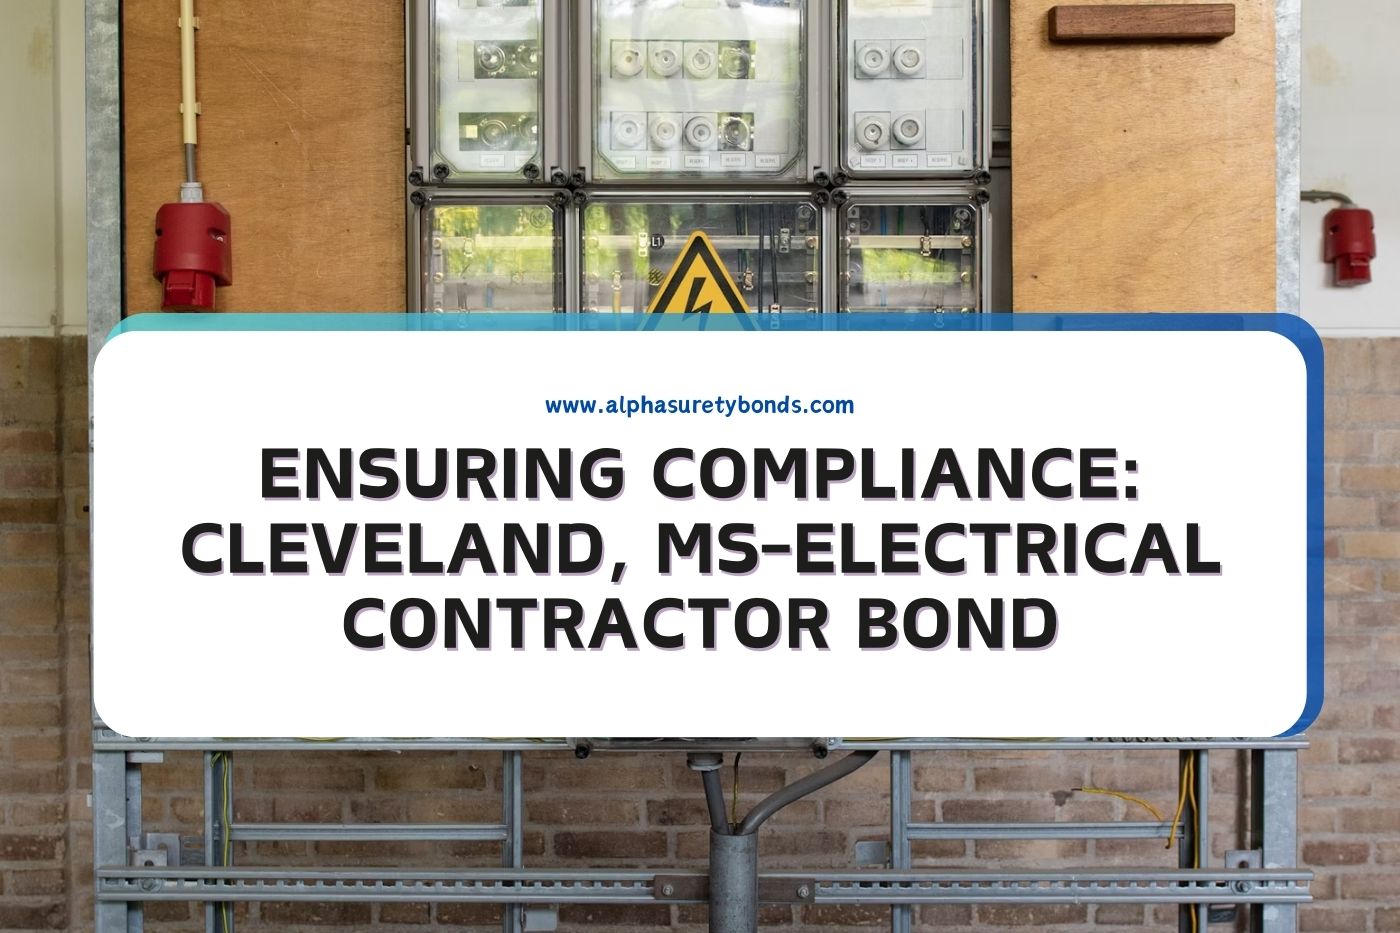 Ensuring Compliance: Cleveland, MS-Electrical Contractor Bond